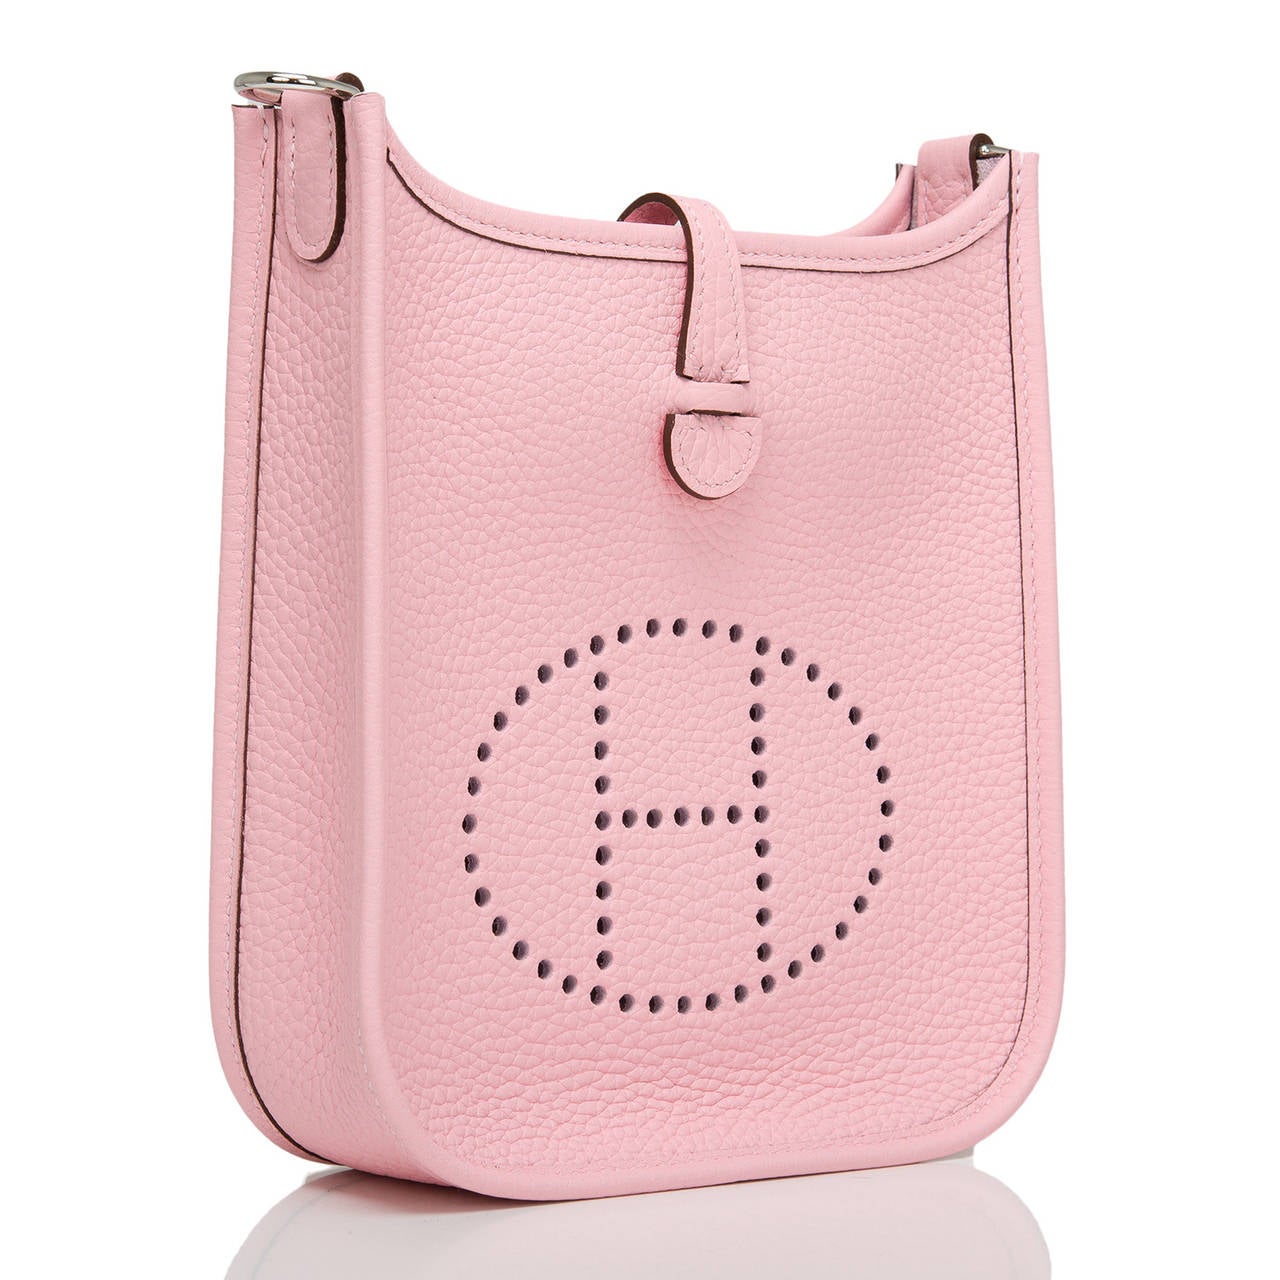 Hermes Rose Sakura Evelyne TPM in clemence leather with palladium hardware.

This Evelyne III is made in a beautiful new Hermes pink-- Rose Sakura -- in rich textured clemence leather and has palladium hardware, tonal stitching, large perforated H